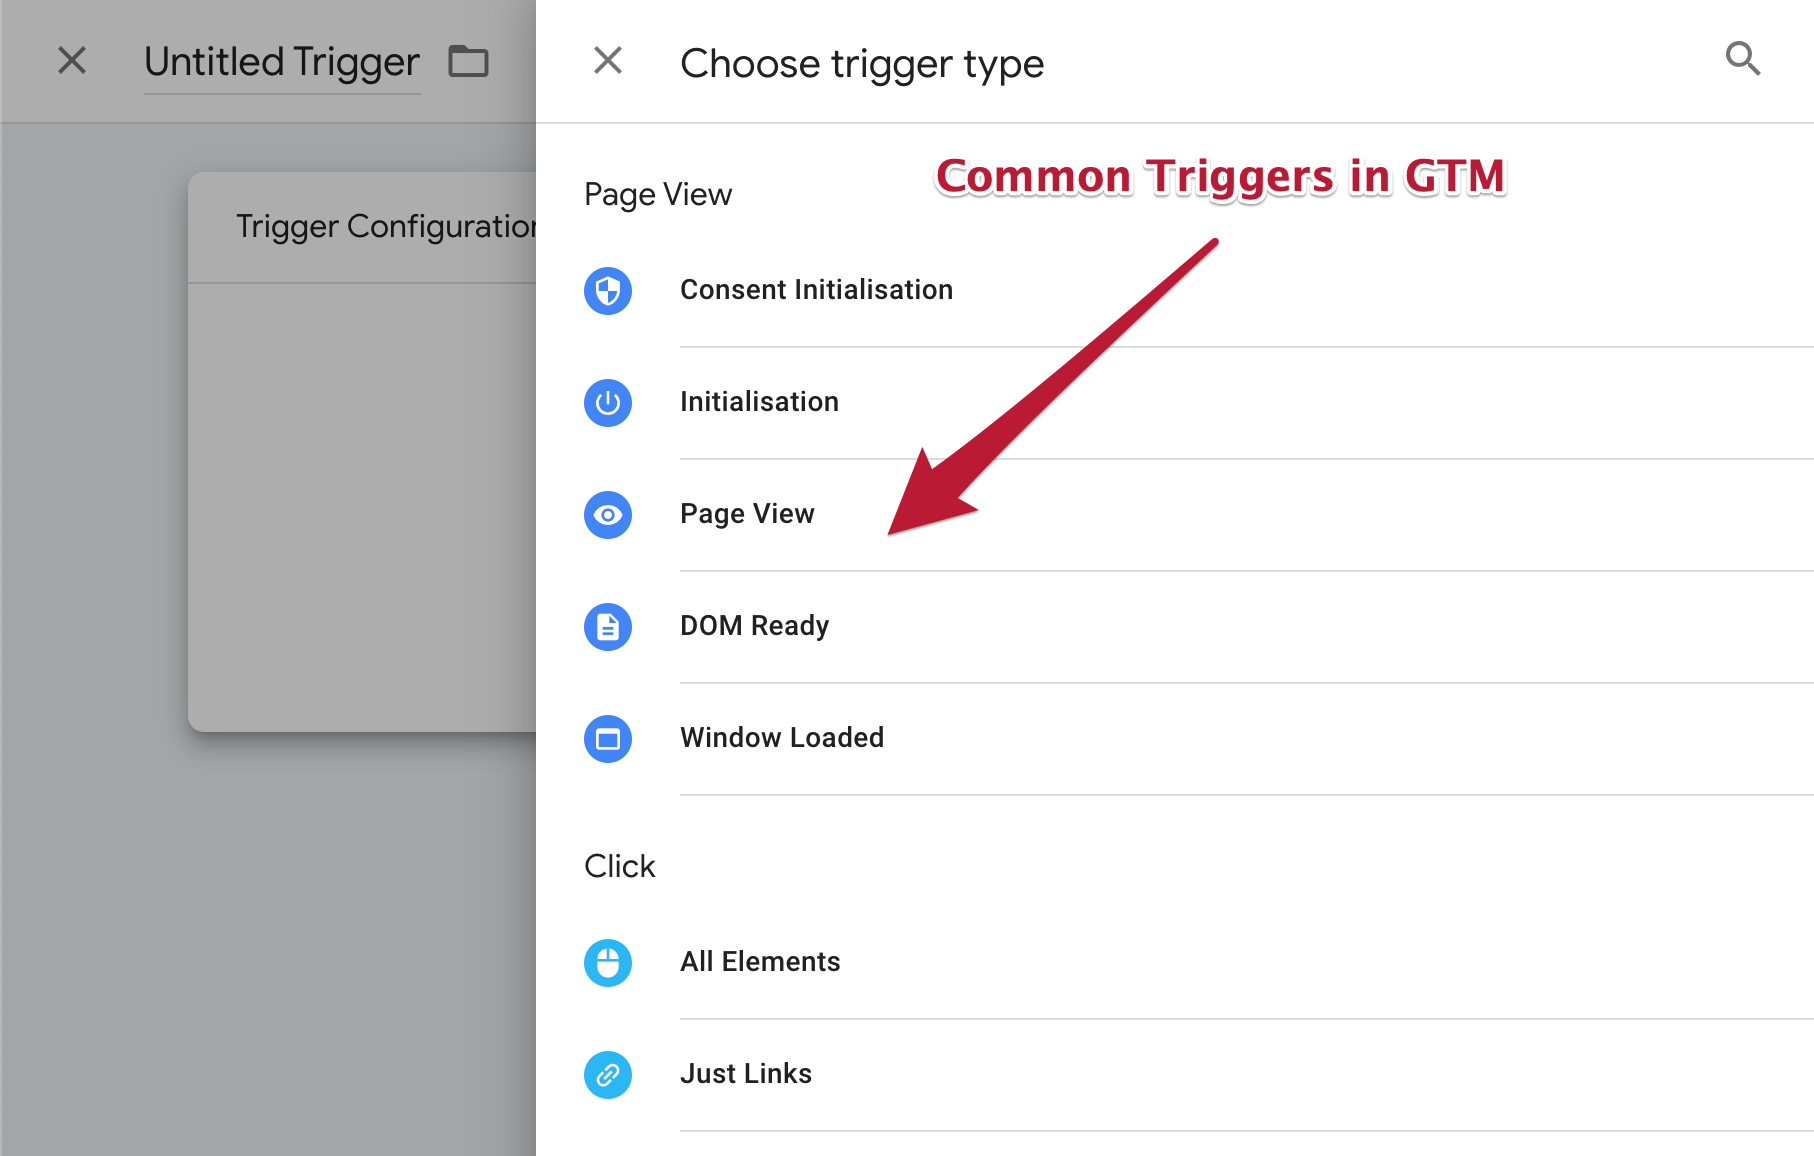 Common Triggers in GTM